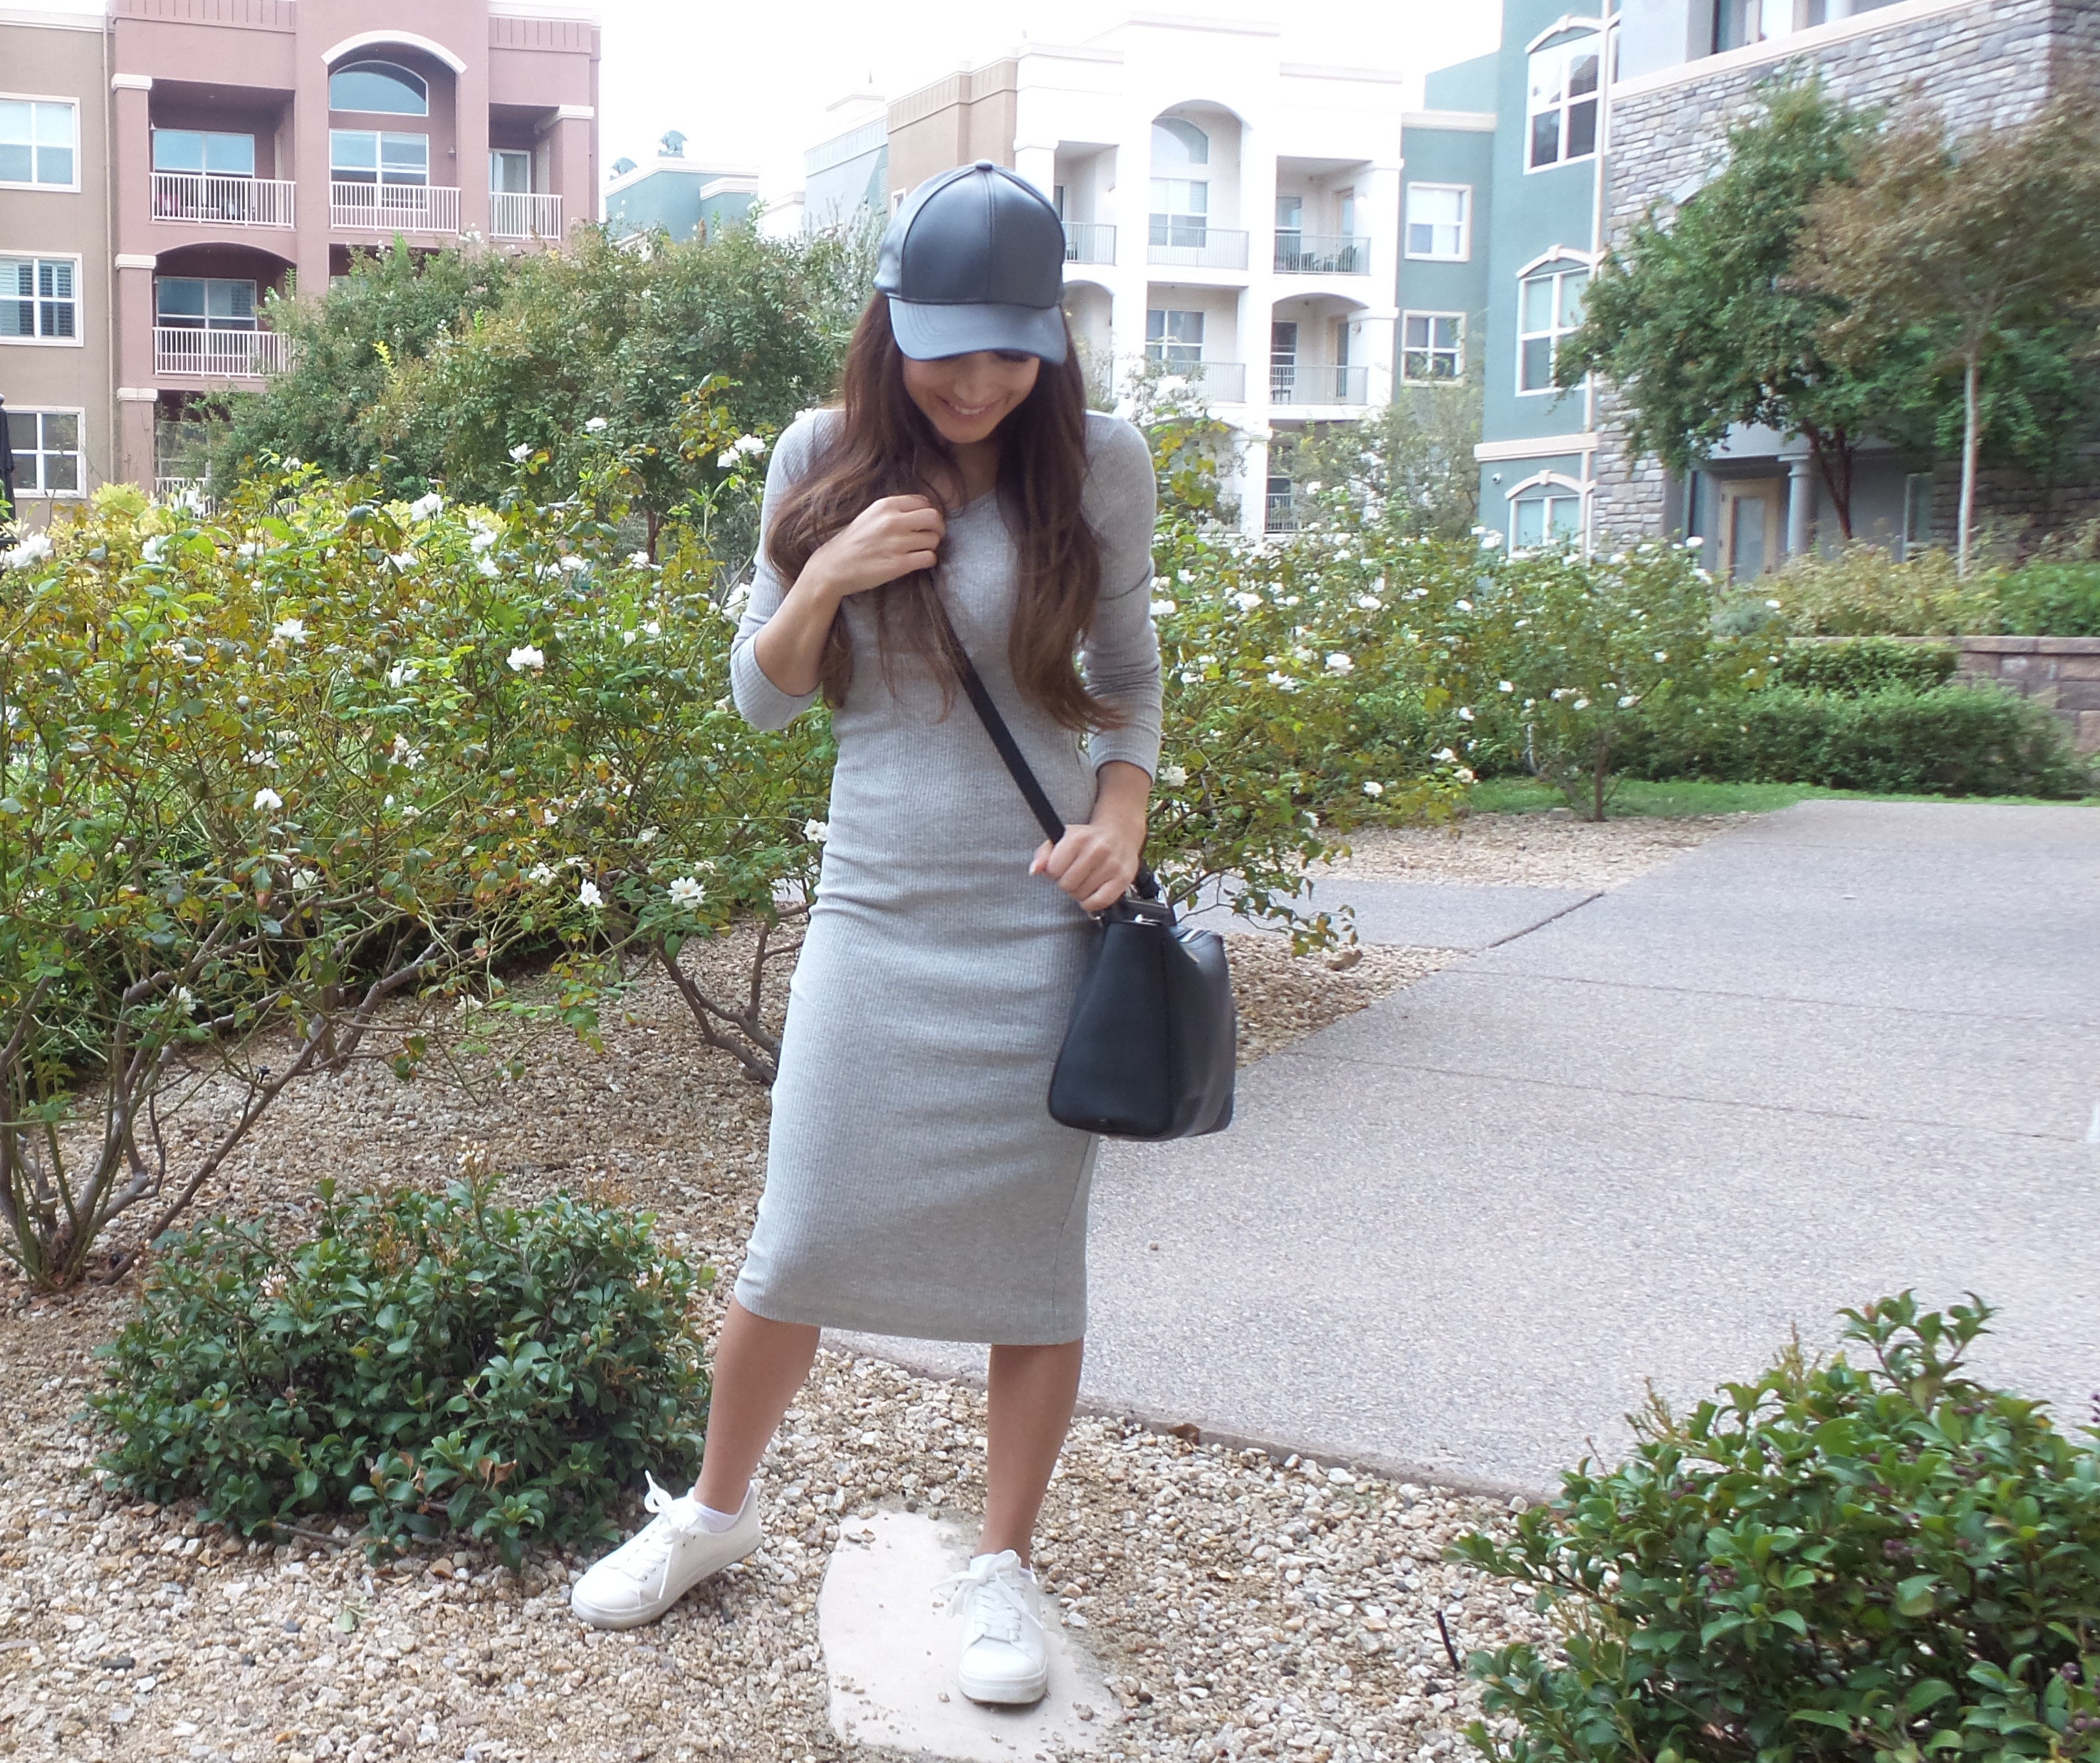 gray t shirt dress outfit